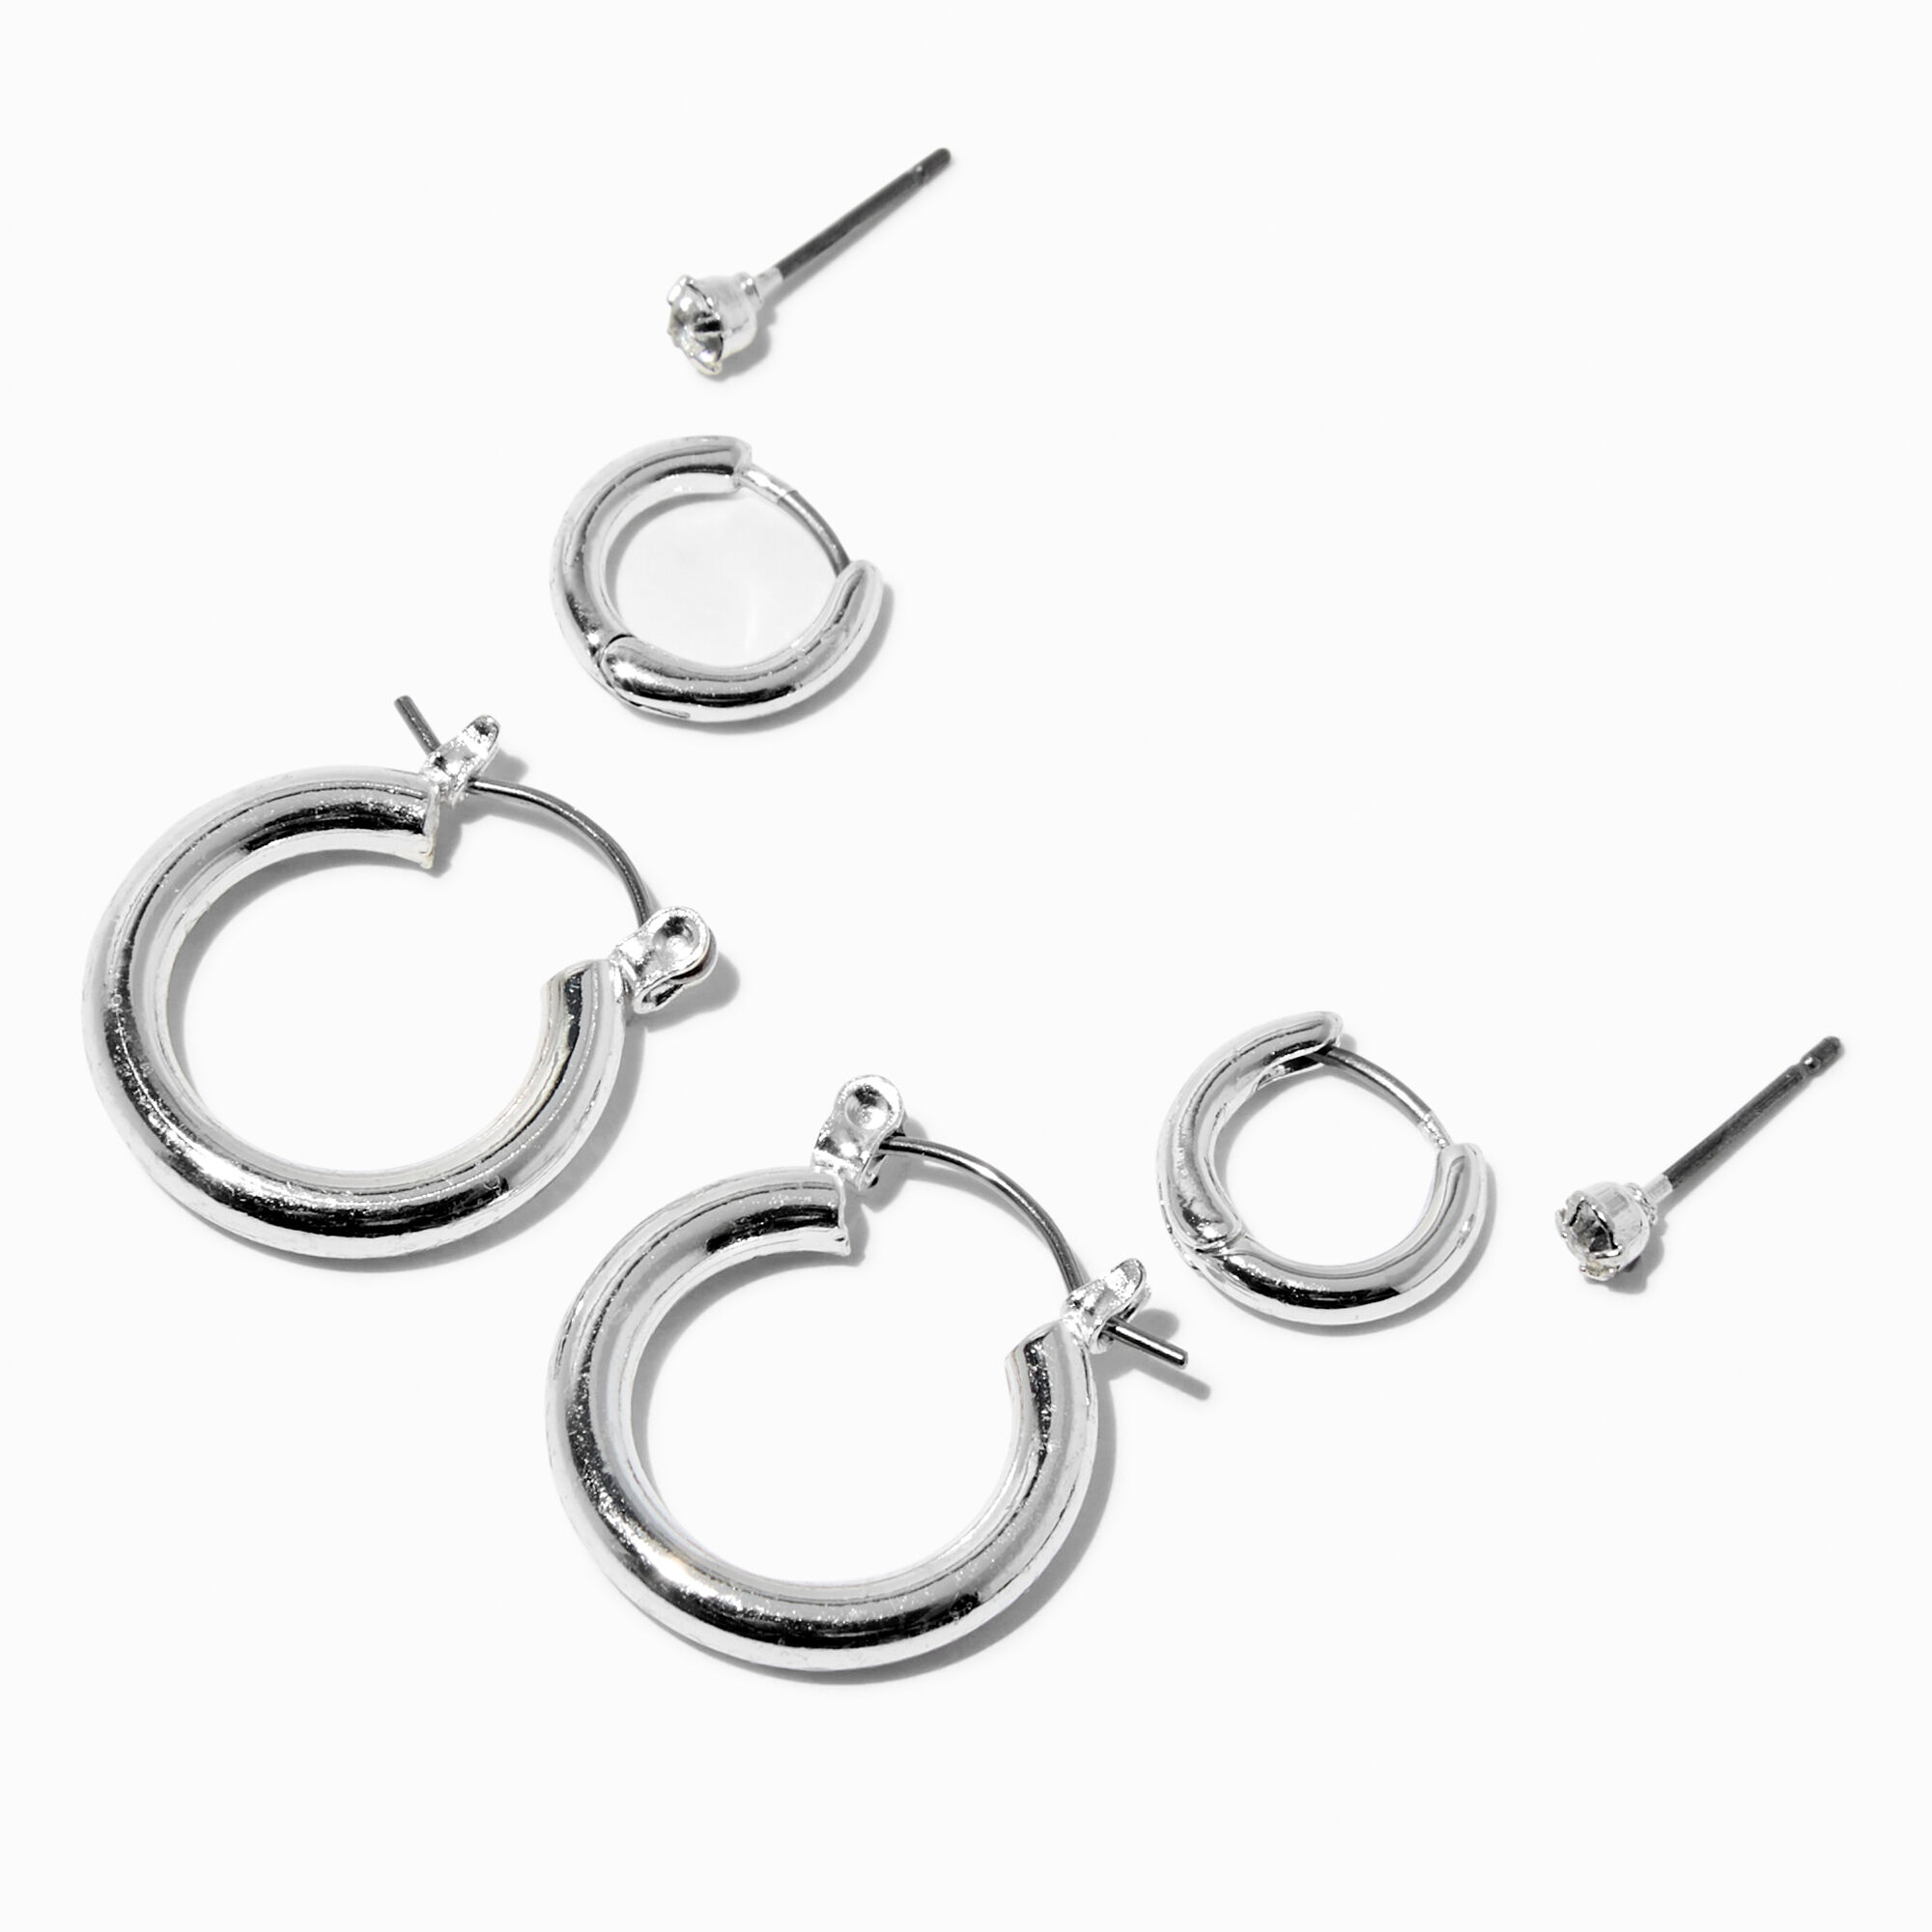 View Claires Tone Tubular Hoop Earring Stackables Set 3 Pack Silver information